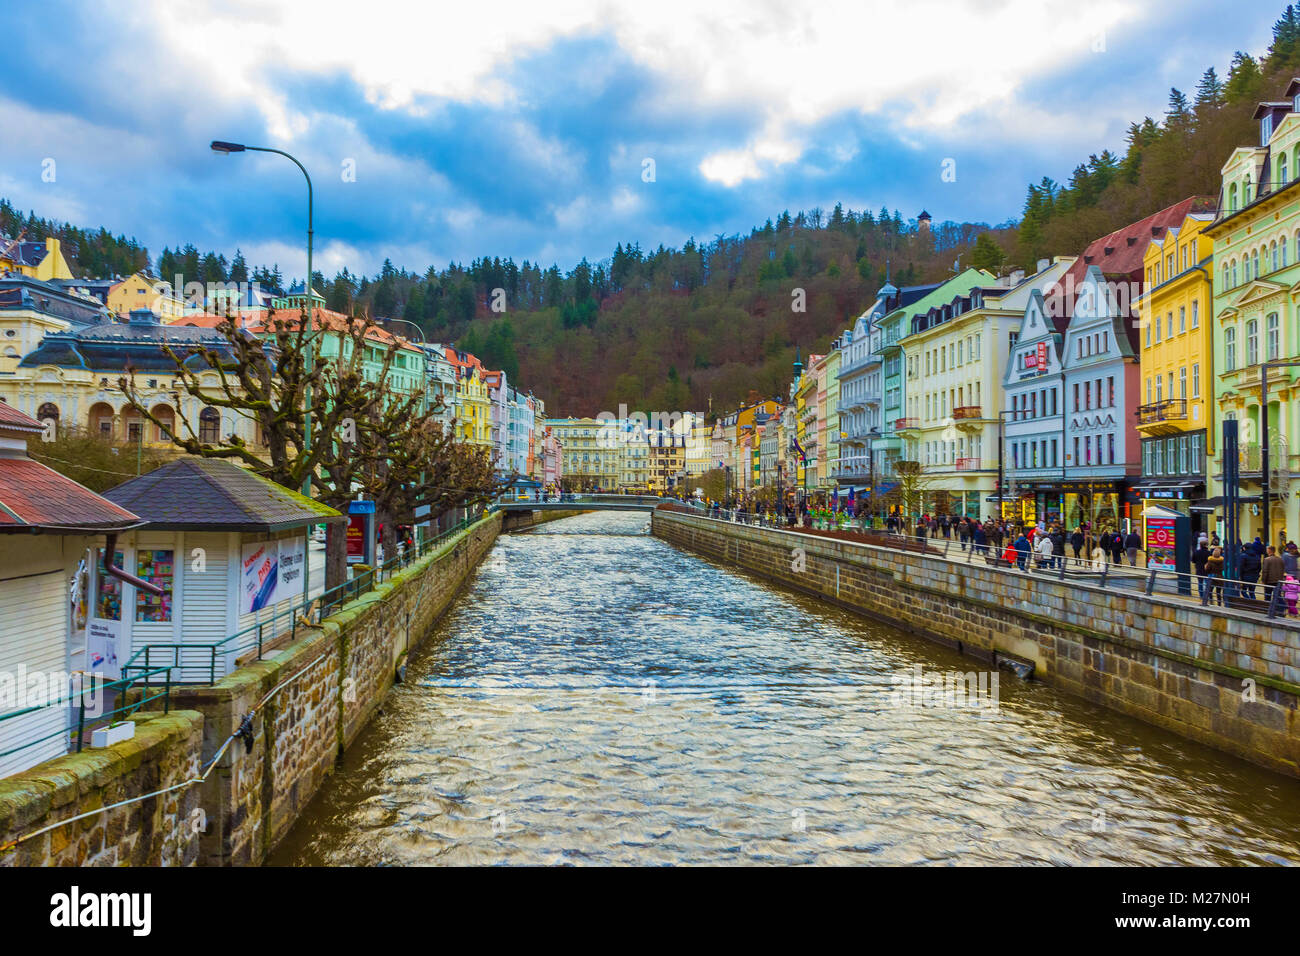 Karlovy Vary, Cszech Republic - January 01, 2018: The embankment of Tepla river in the center Stock Photo